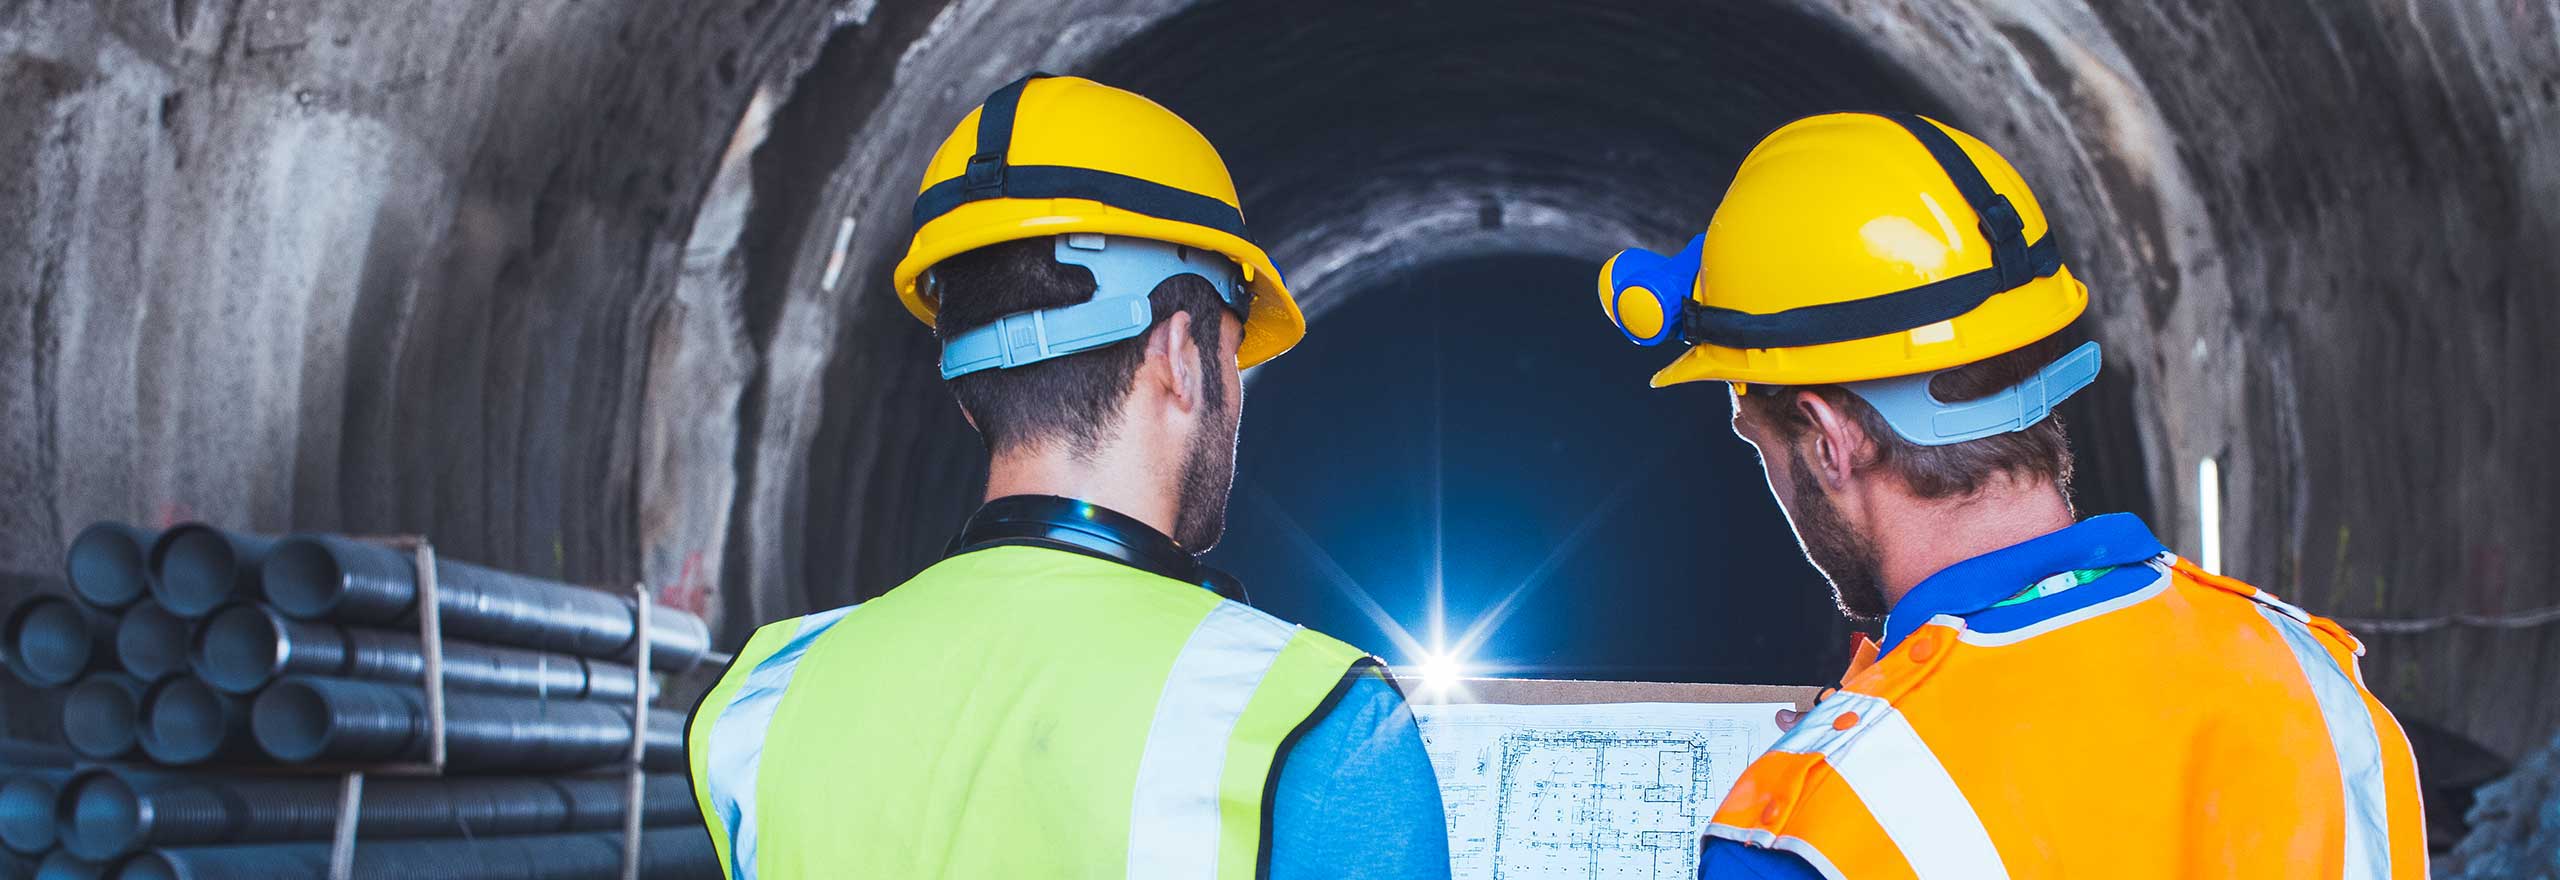 Workers reviewing digitised CAD drawings in tunnel